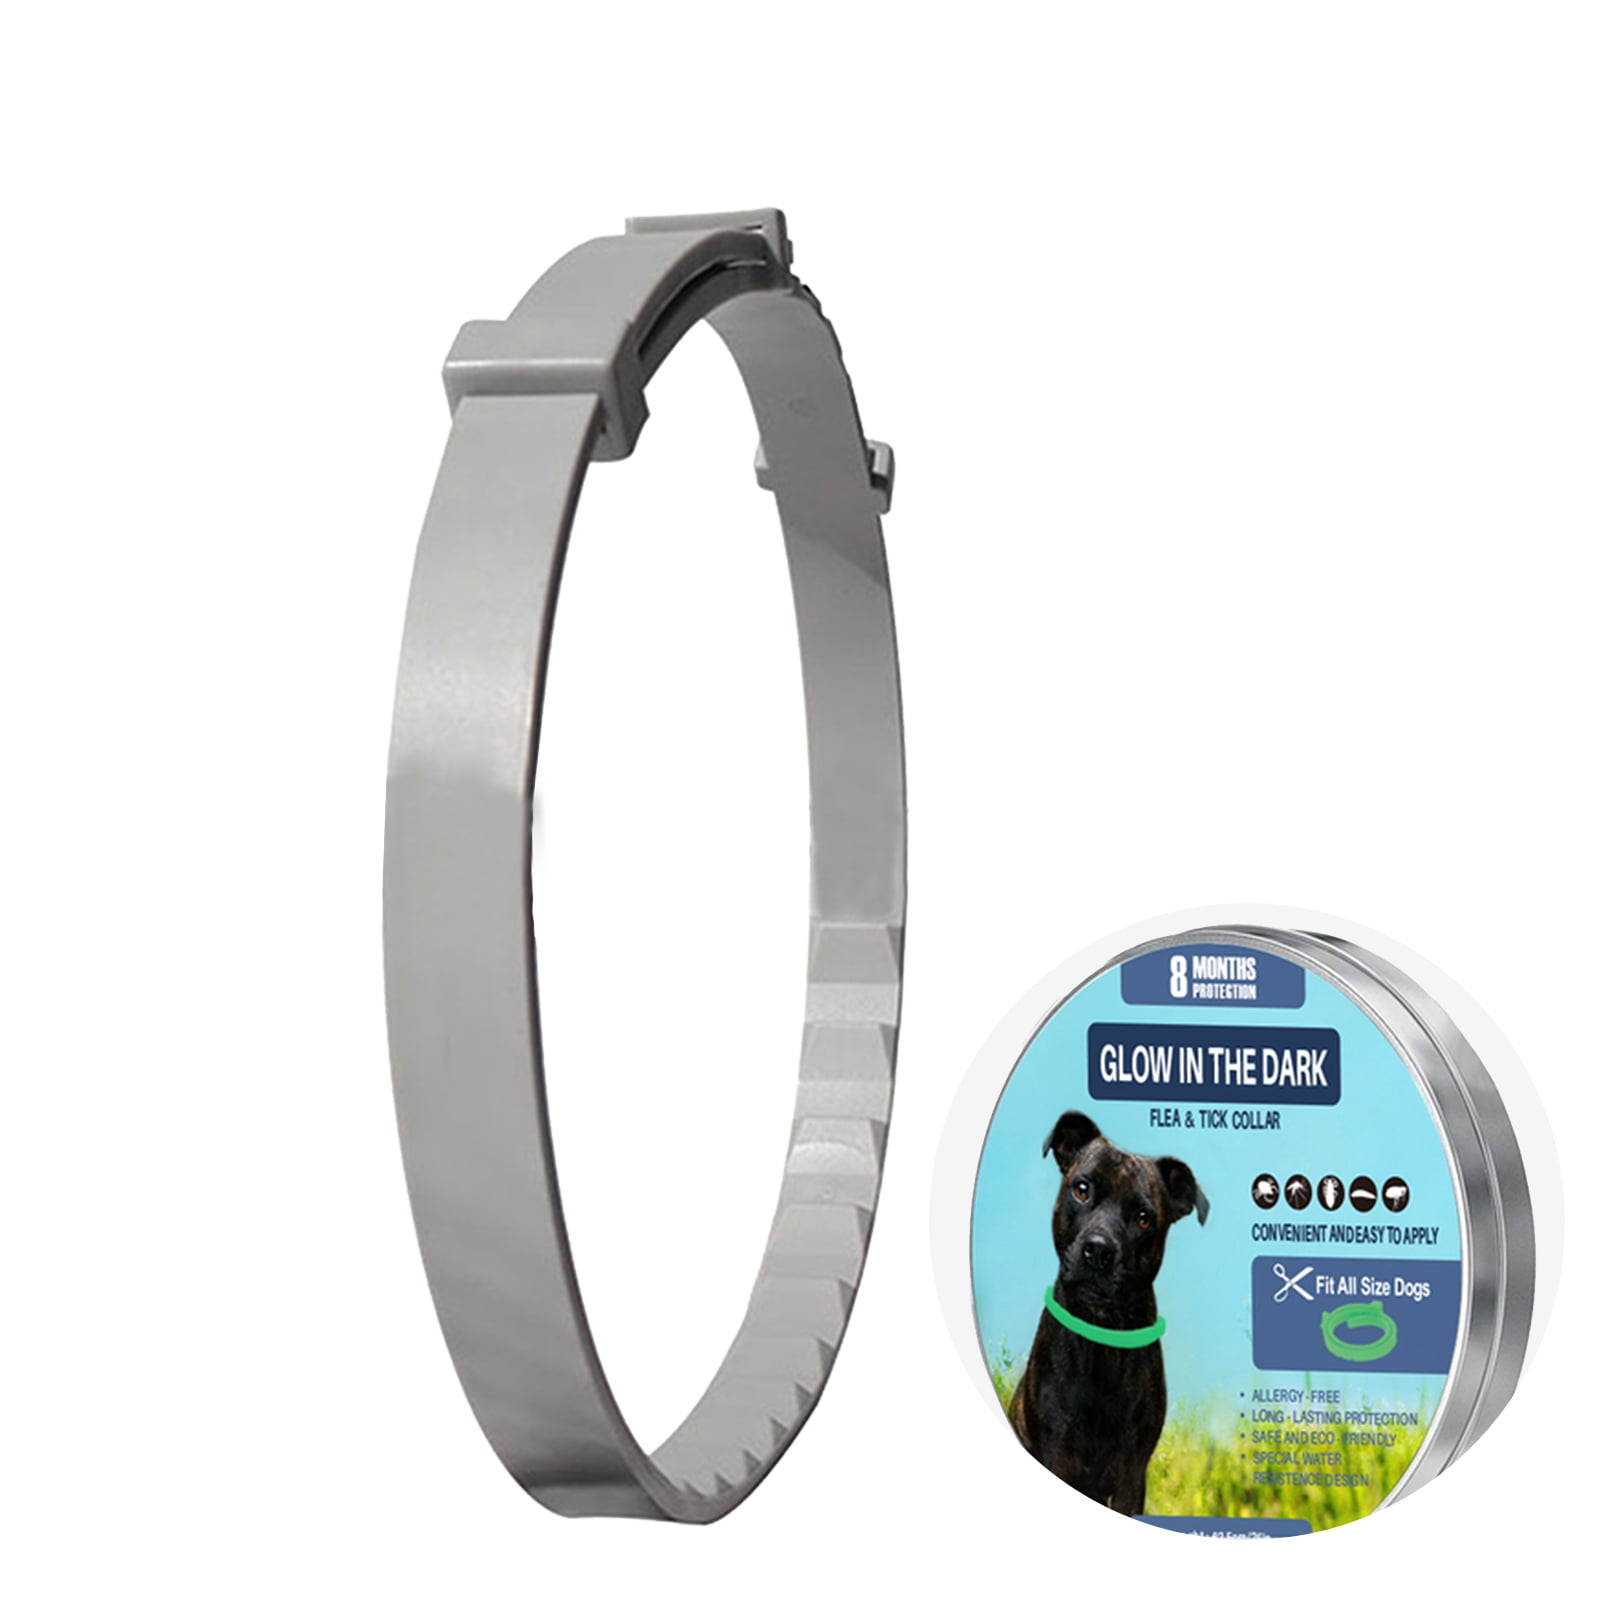 Dog Flea & Tick Collar Flee Lasts 3 Months Protection Stretch Fits All Size Dogs 